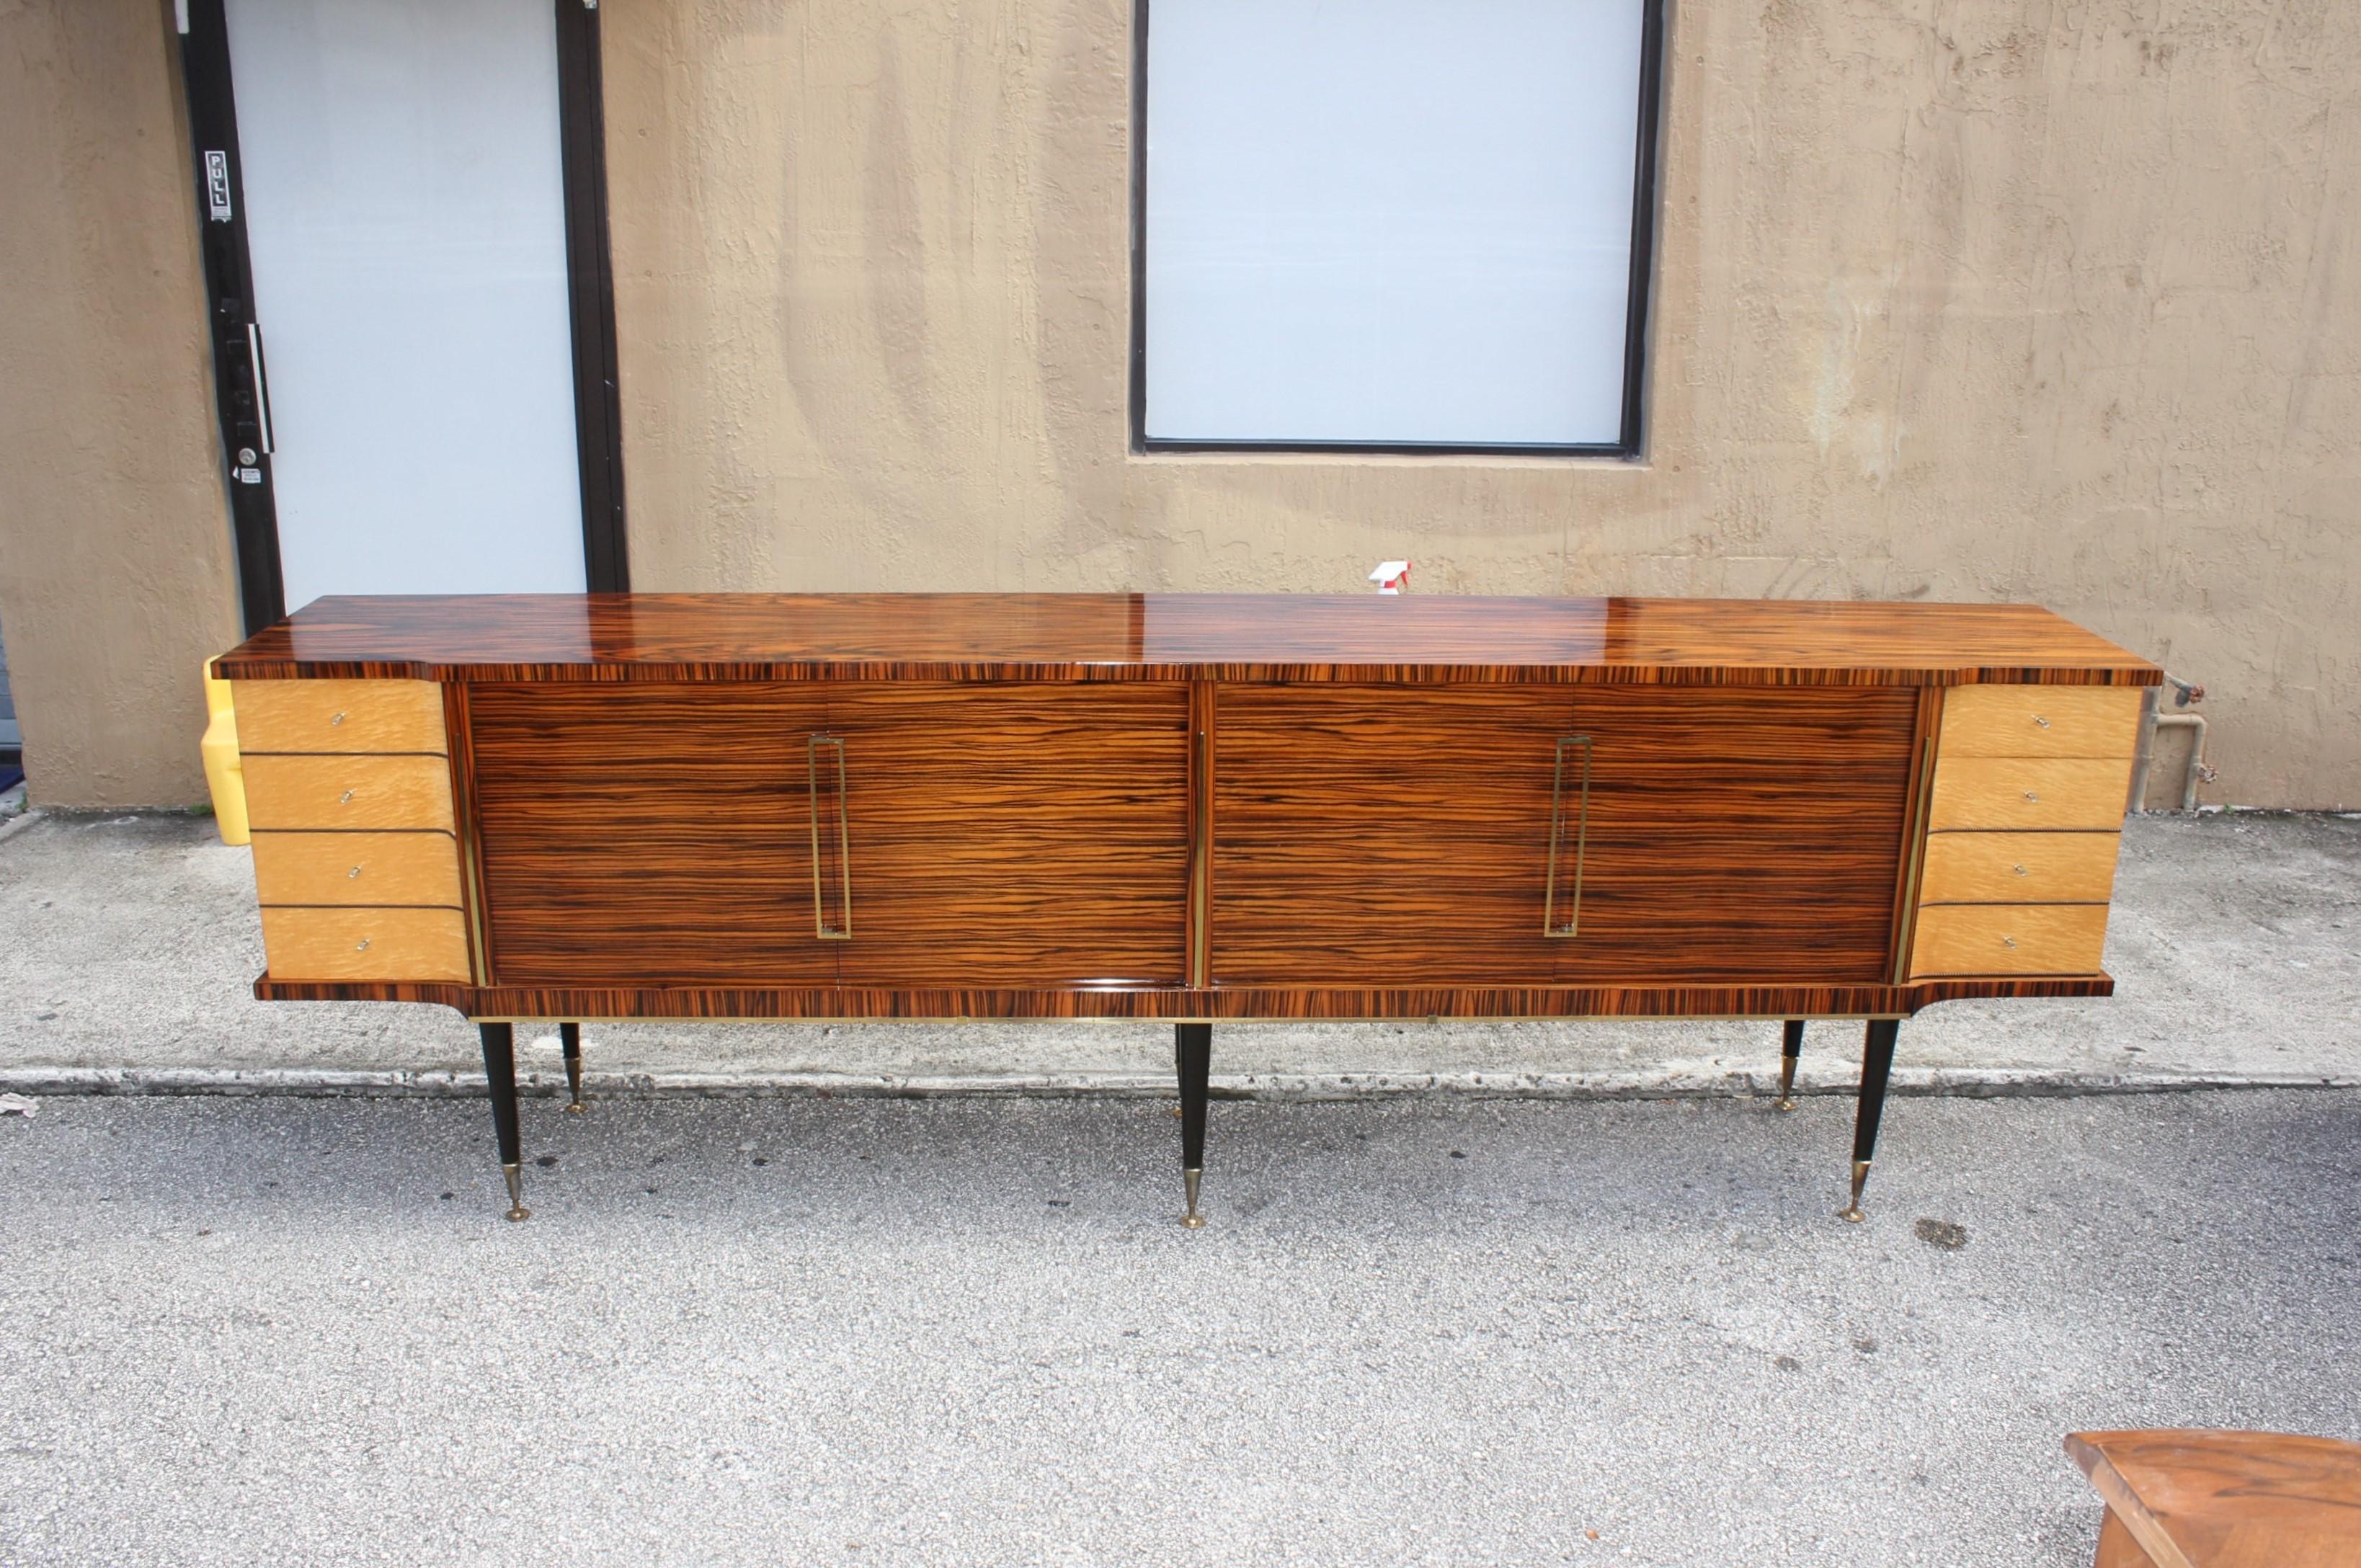 Long French Art Deco exotic Macassar ebony with burl wood sideboard or buffet, circa 1940s. With four drawers burl wood, and the bar door section are in burl wood, two shelves adjustable, and you can remove the shelves if you need more space, six